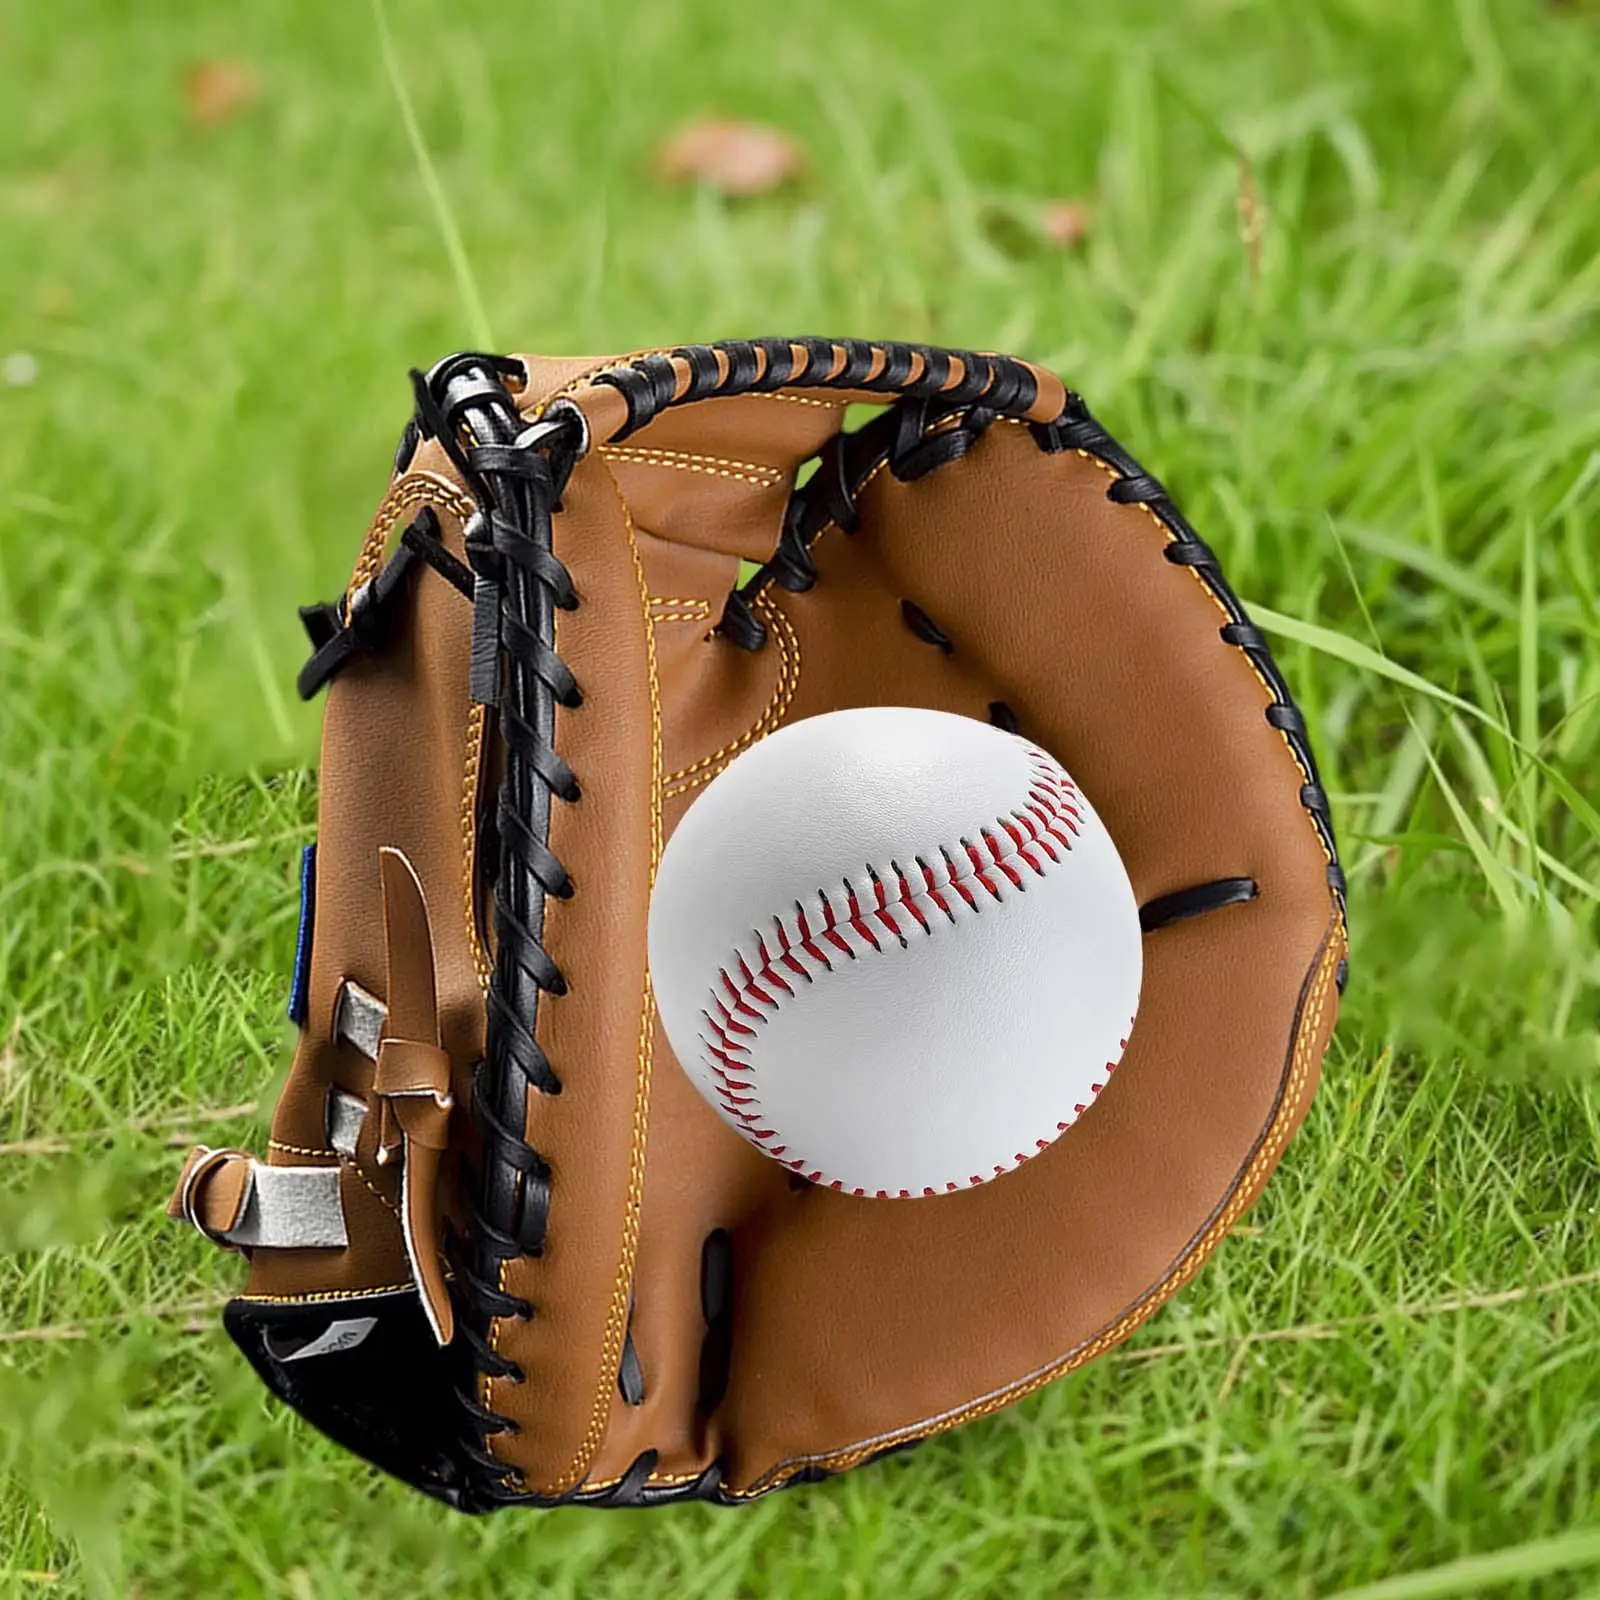 Baseball Catcher Gloves Thickened with Baseball Ball 12.5`` Catching Gloves Softball Gloves Baseball Mitts for Men Women